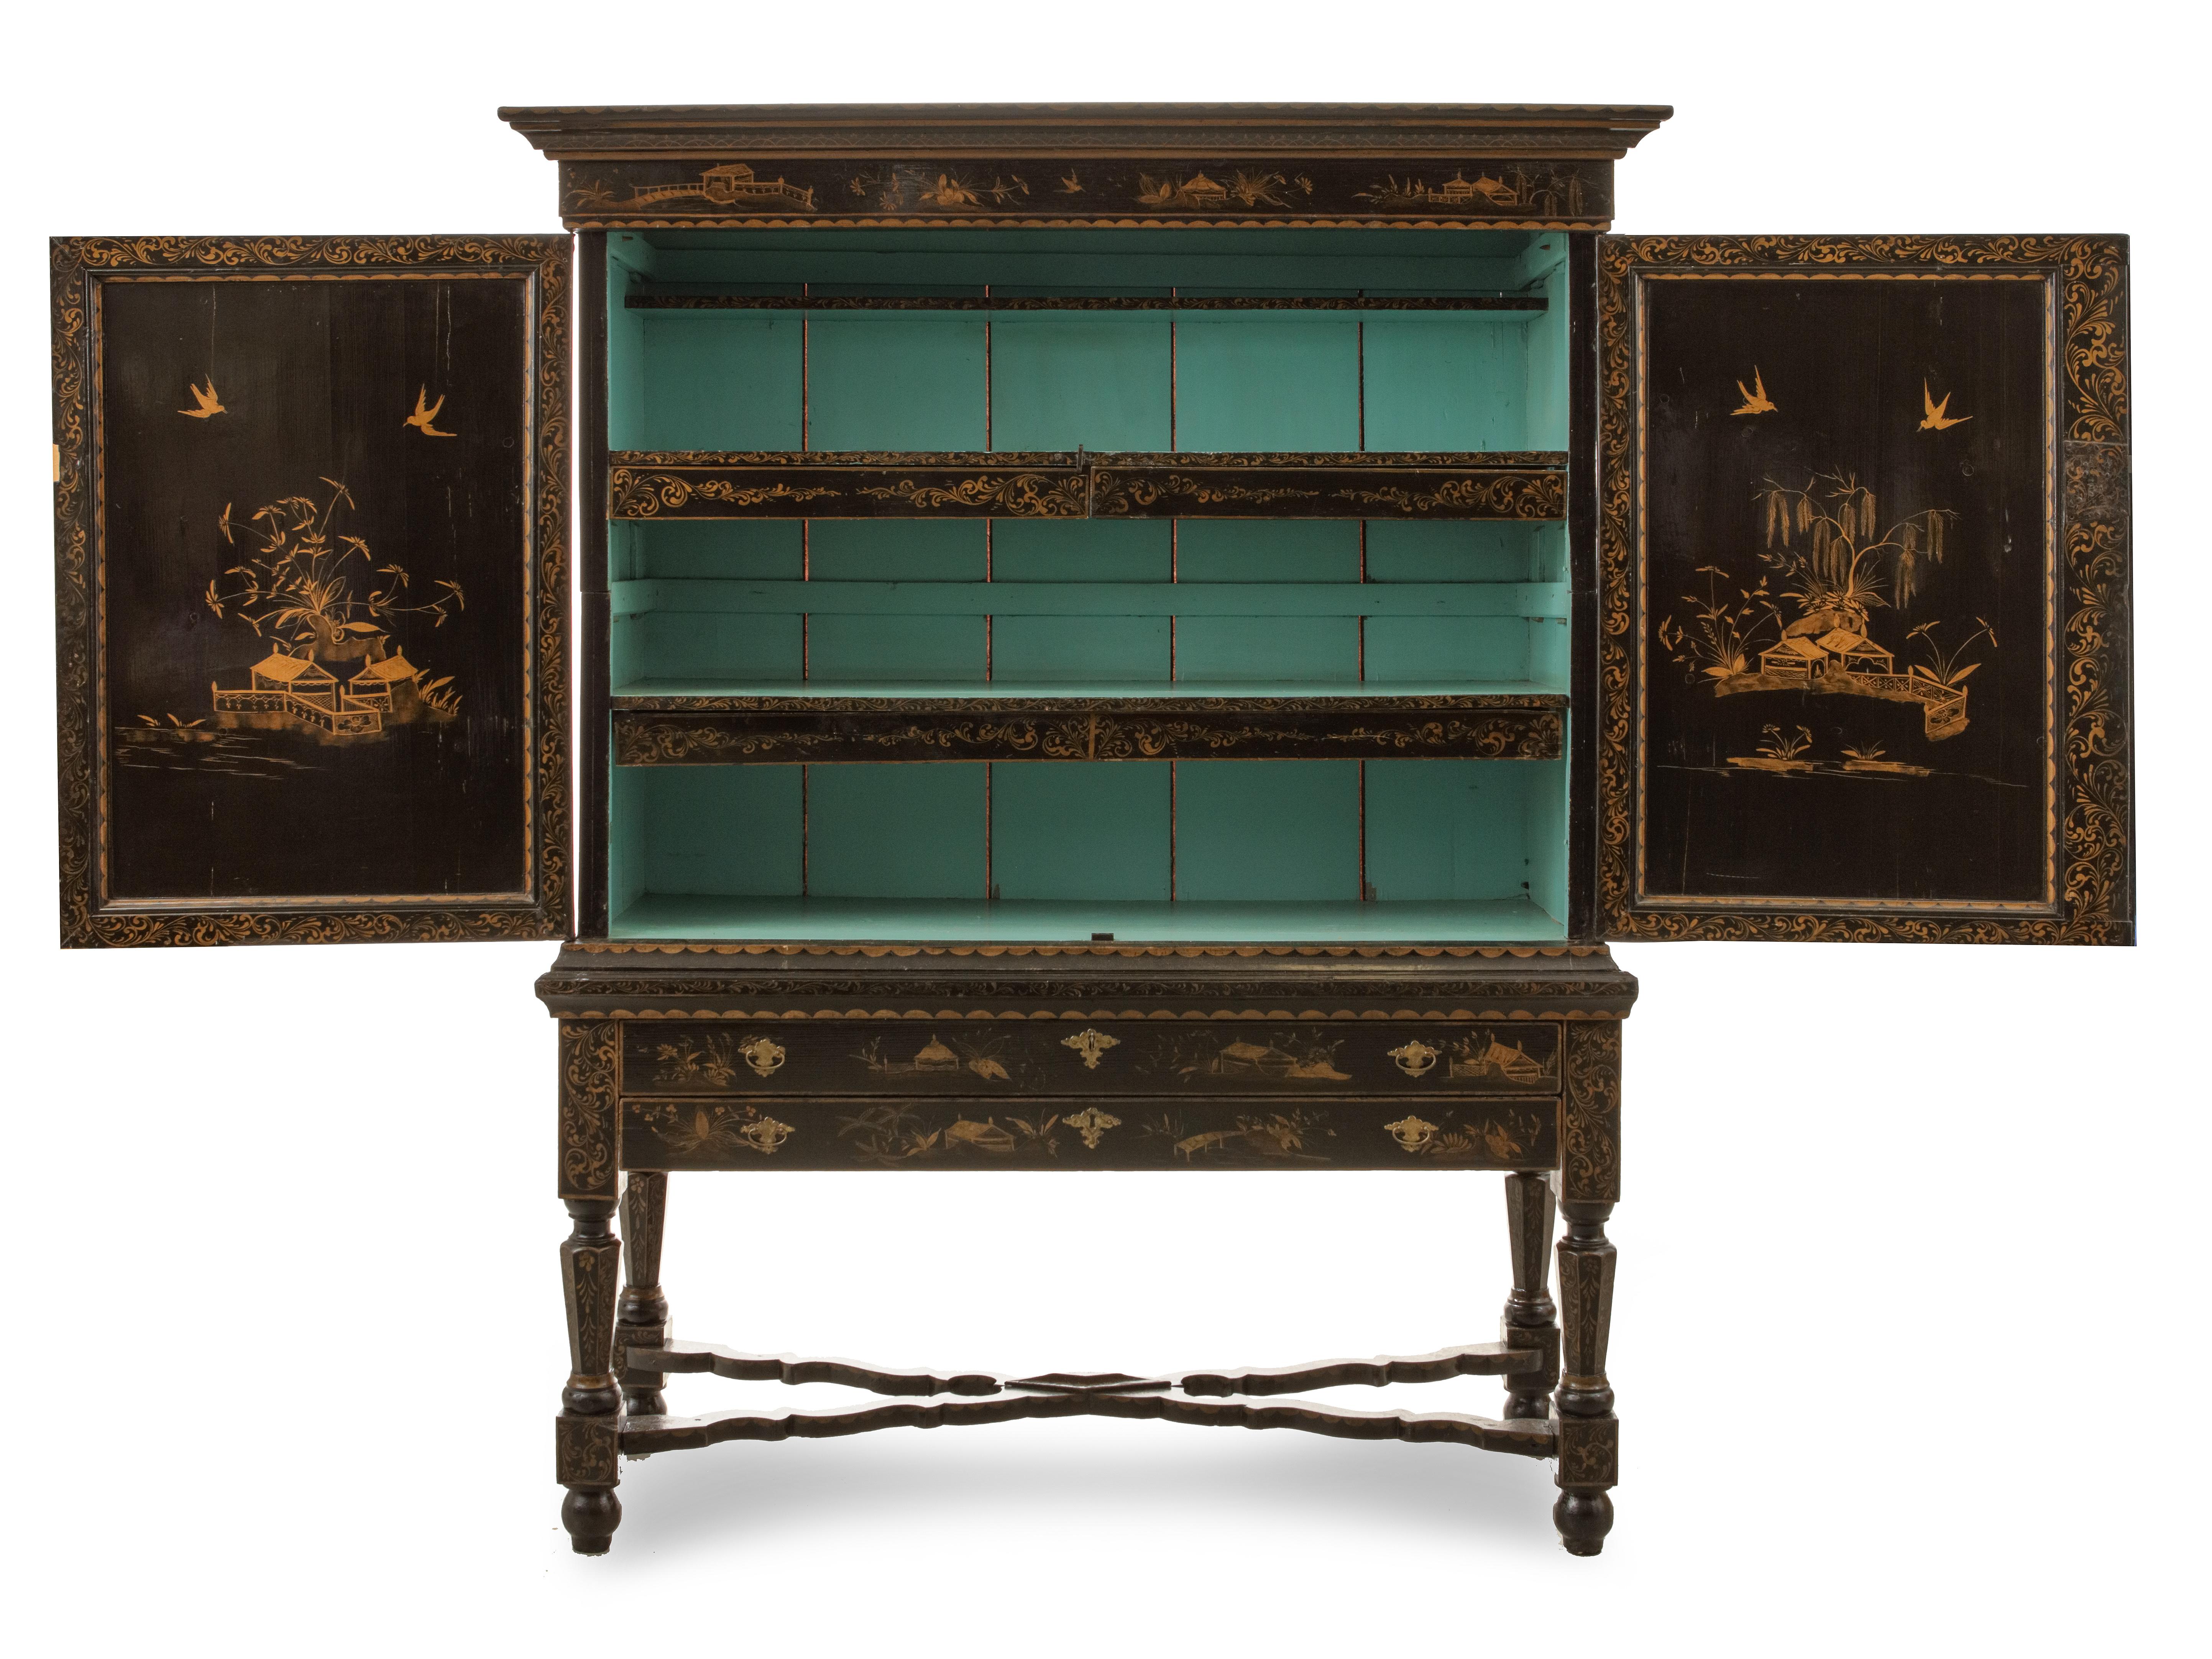 late 17th century chinoiserie cabinet on stand